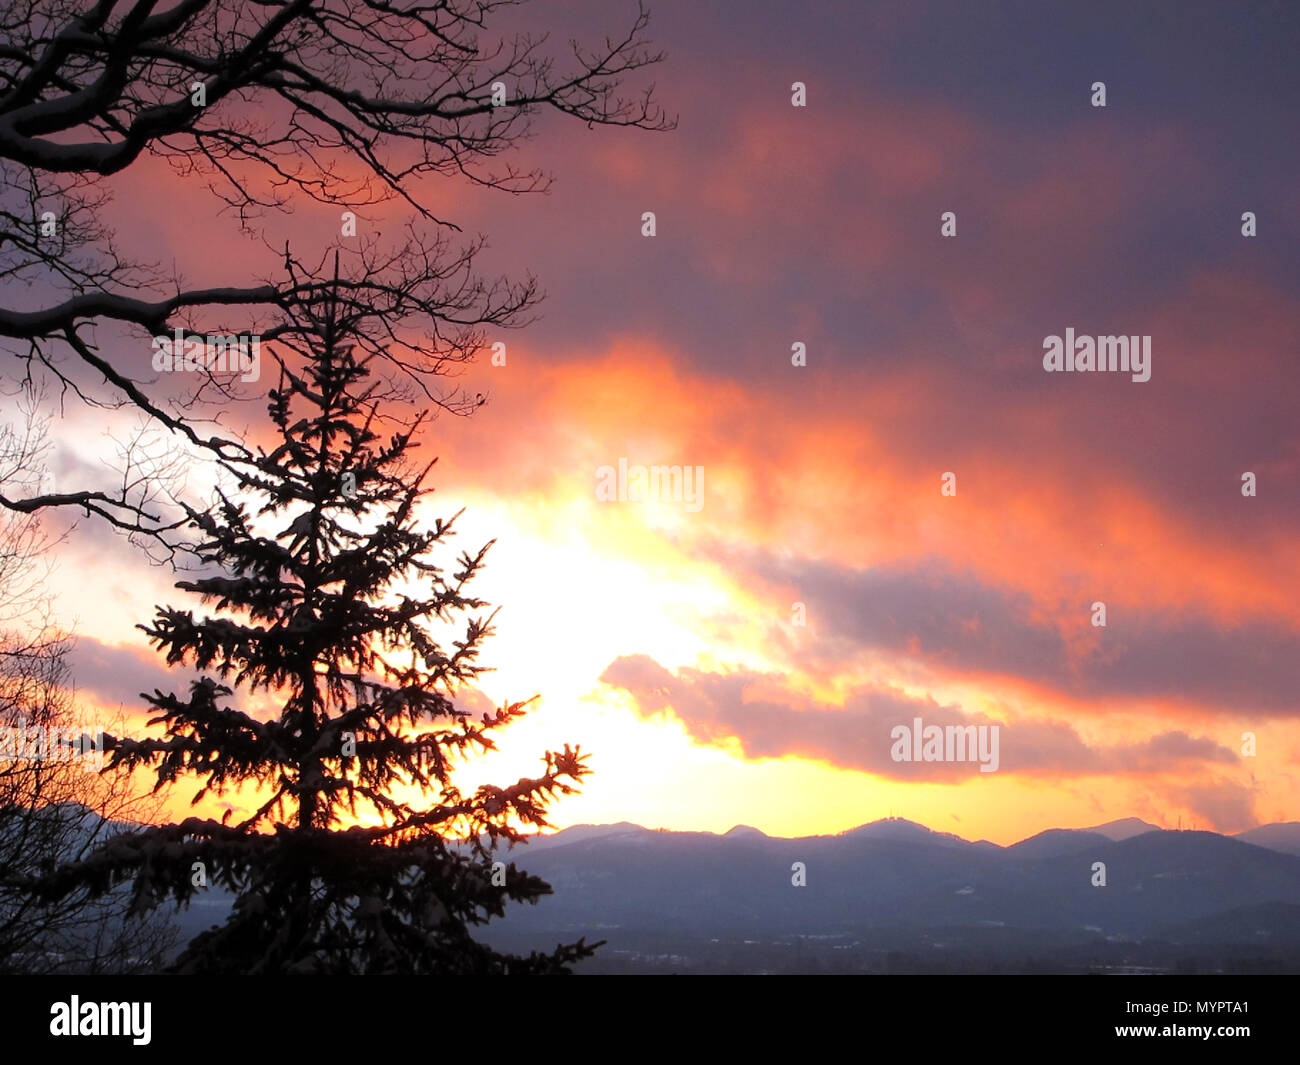 Winter view of the Blue Ridge Mountains at sunset through silhouette of Blue Spruce and White Oak trees. Asheville, North Carolina. Stock Photo